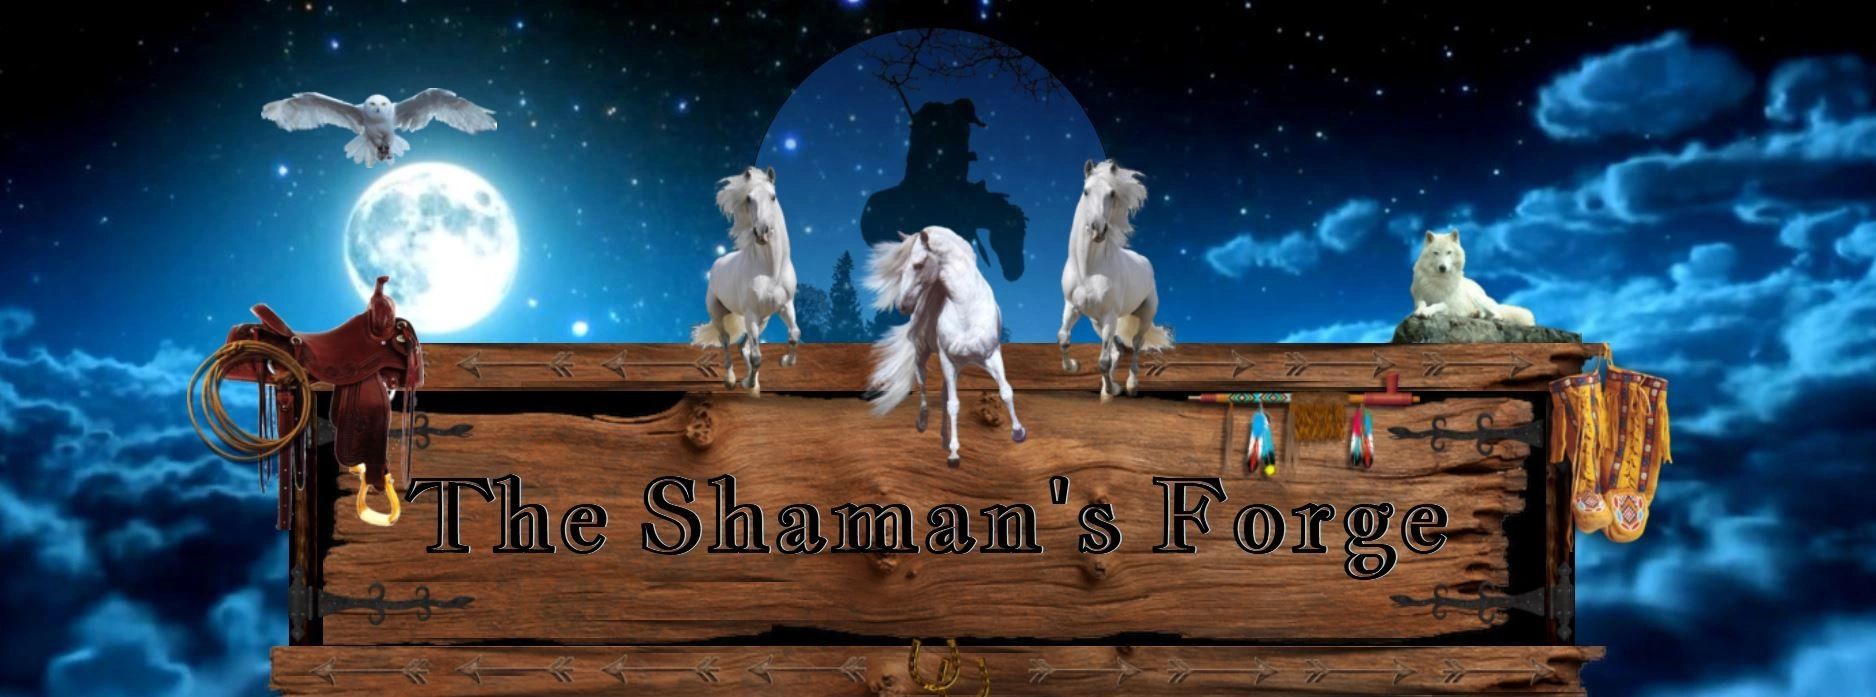 The Shaman's Forge